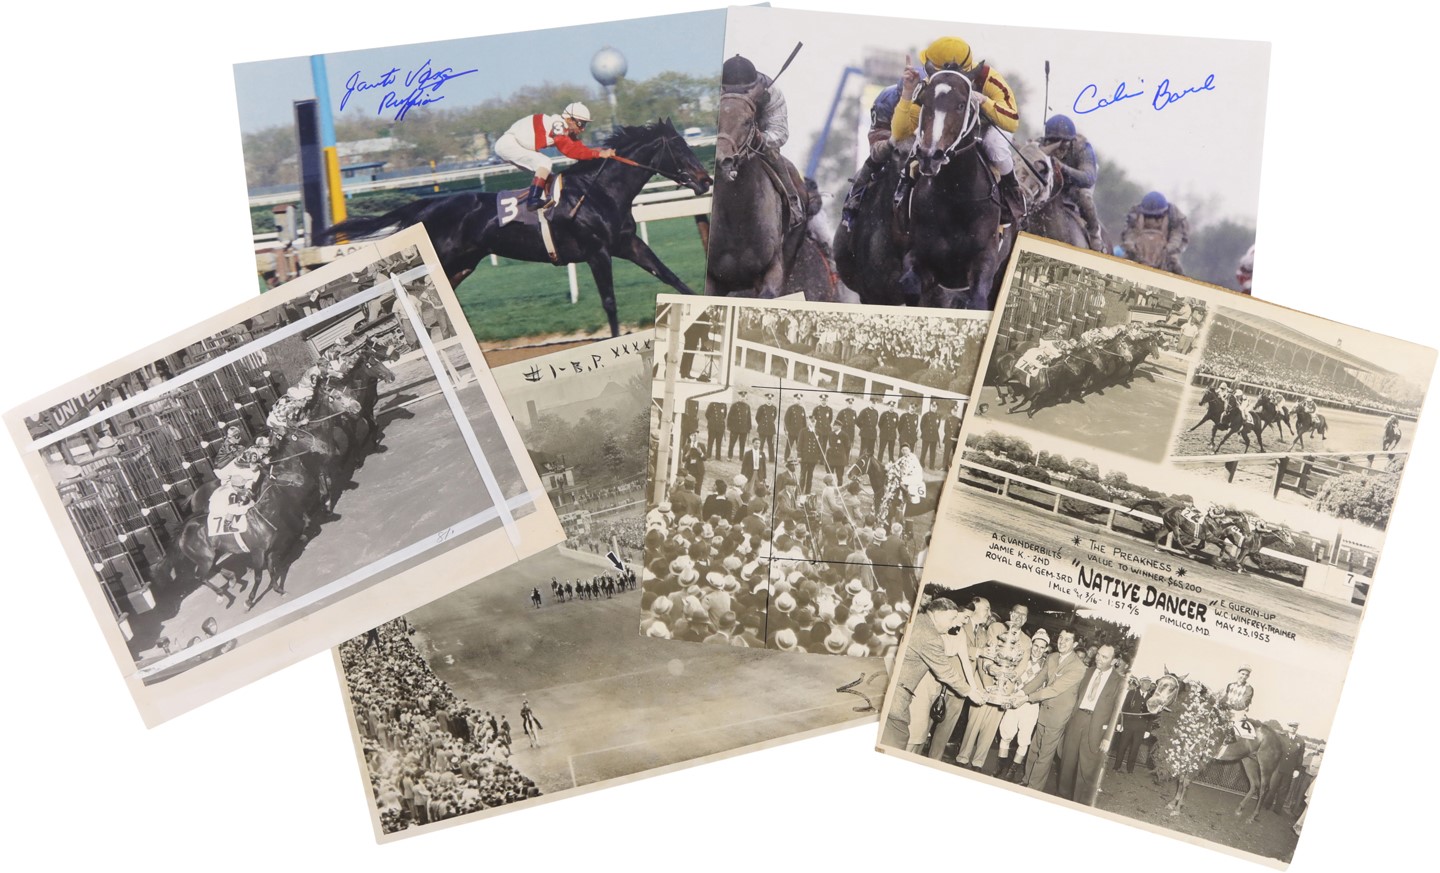 Horse Racing - Oversized Photographs of Star Racehorses (36)